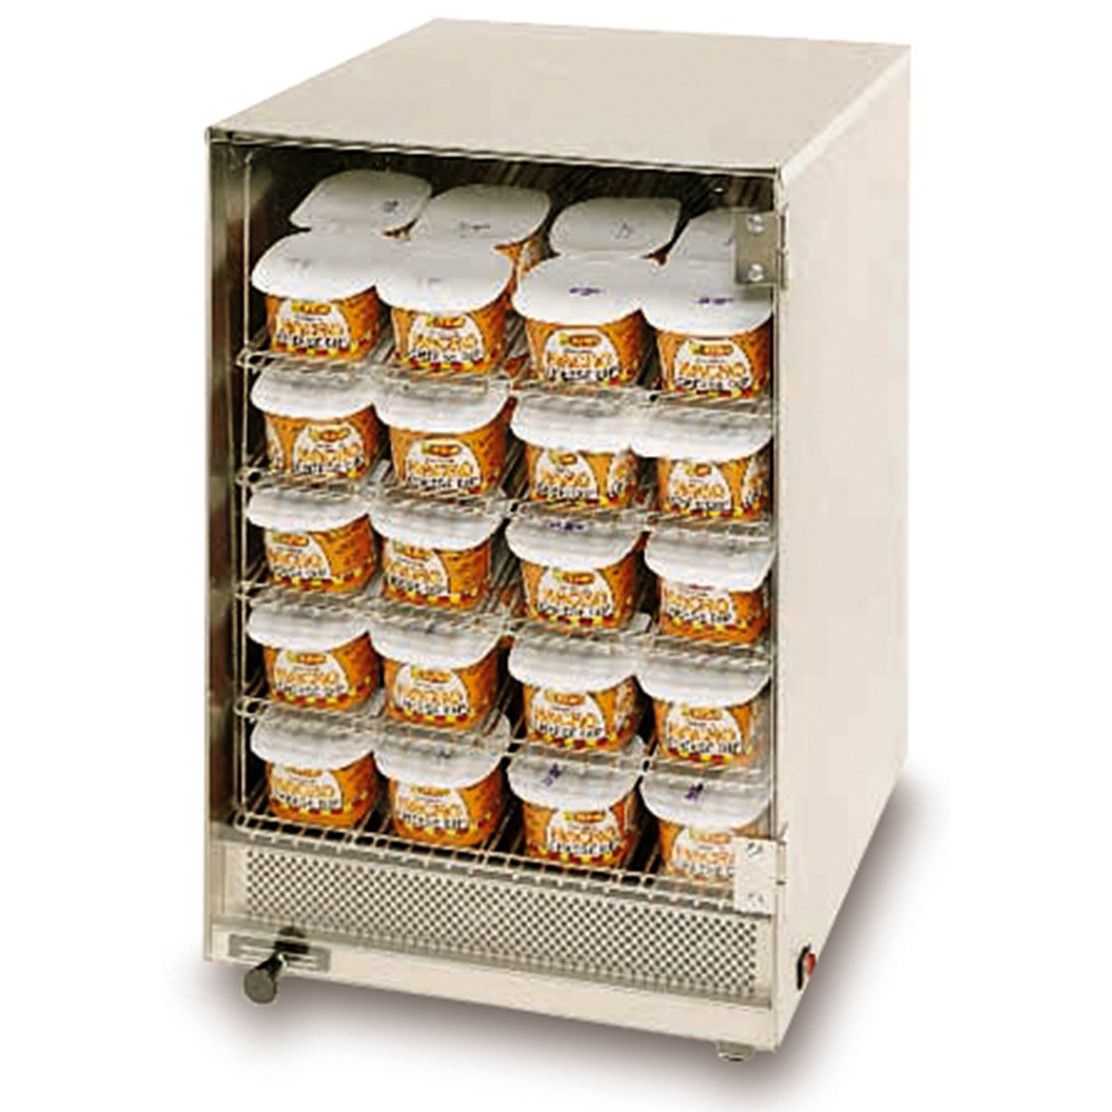 Exclusive Nacho Cheese Pump And Chip Warmer Concessions For